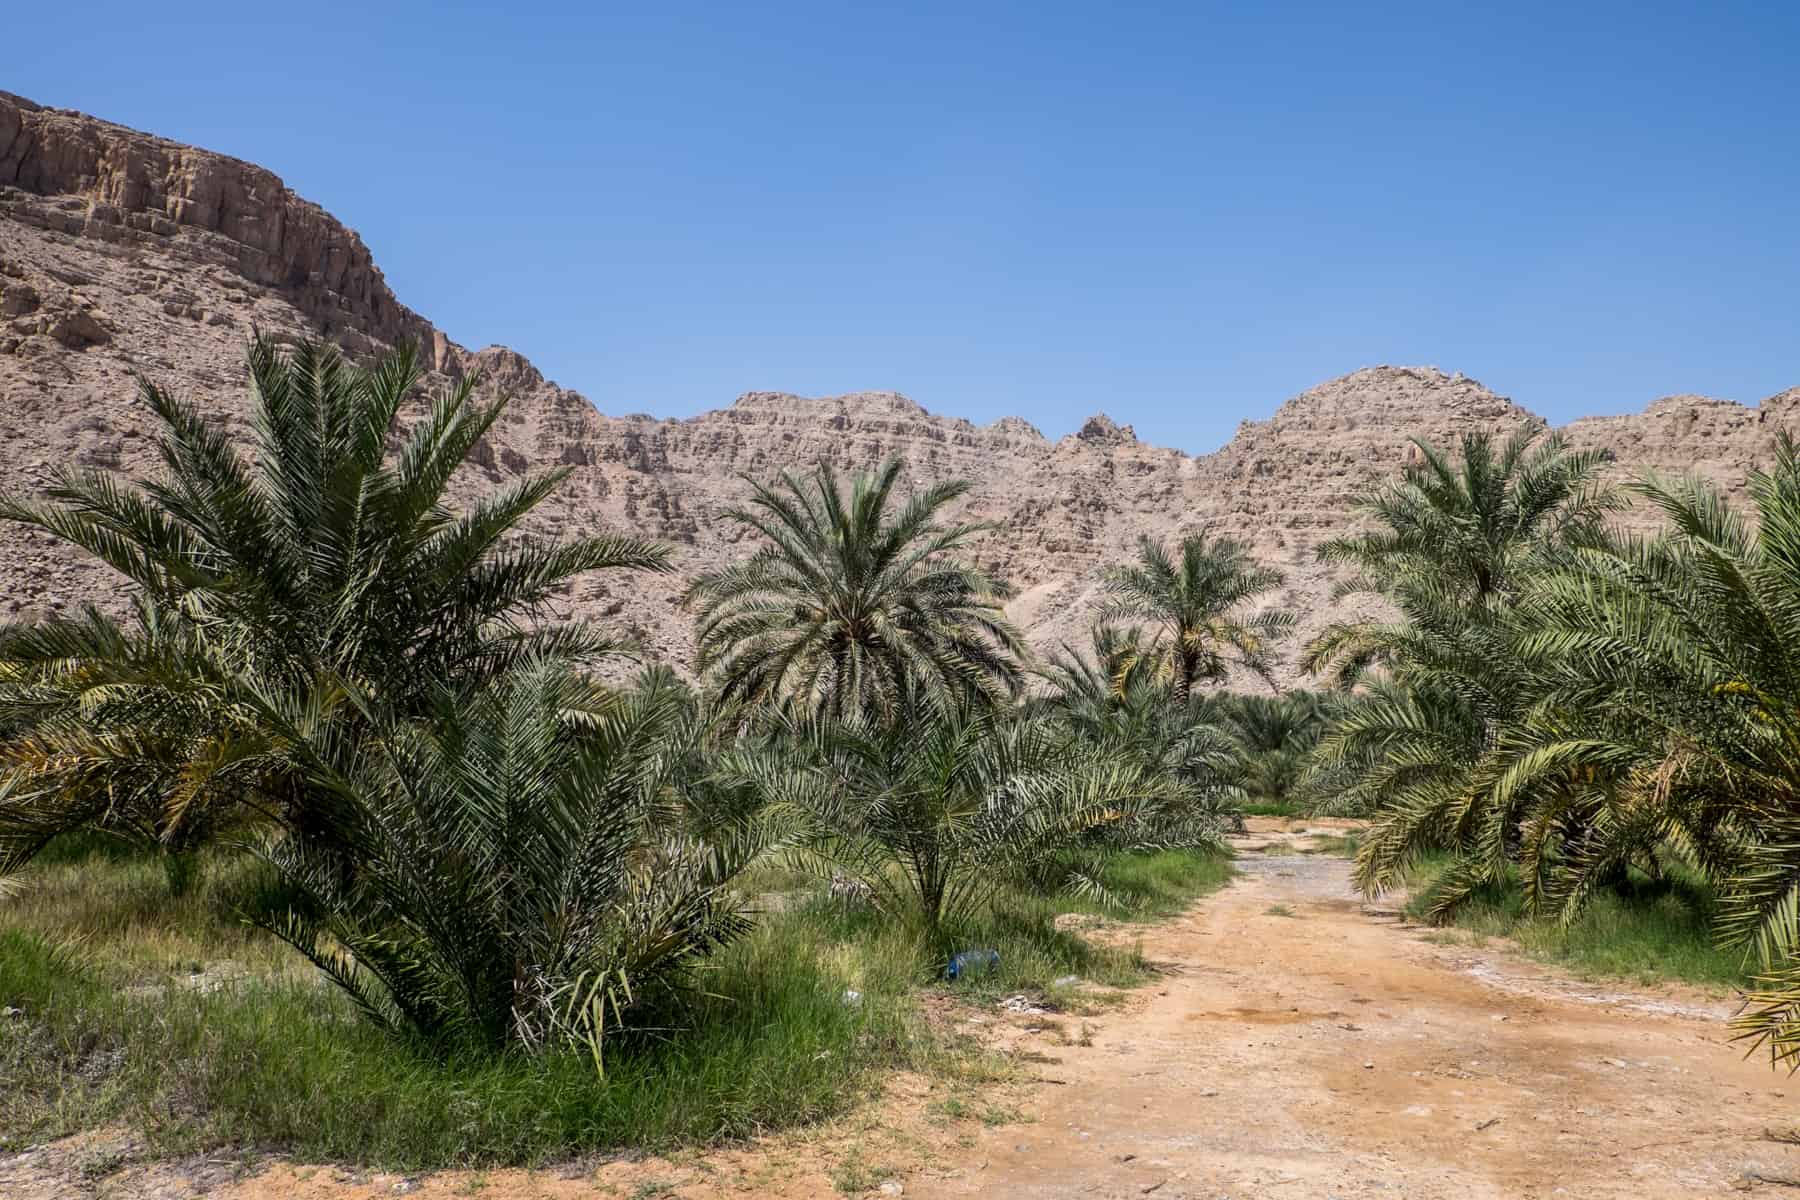 Large, busy palm-like trees grow from desert sands, surrounded by a low, light beige mountain range